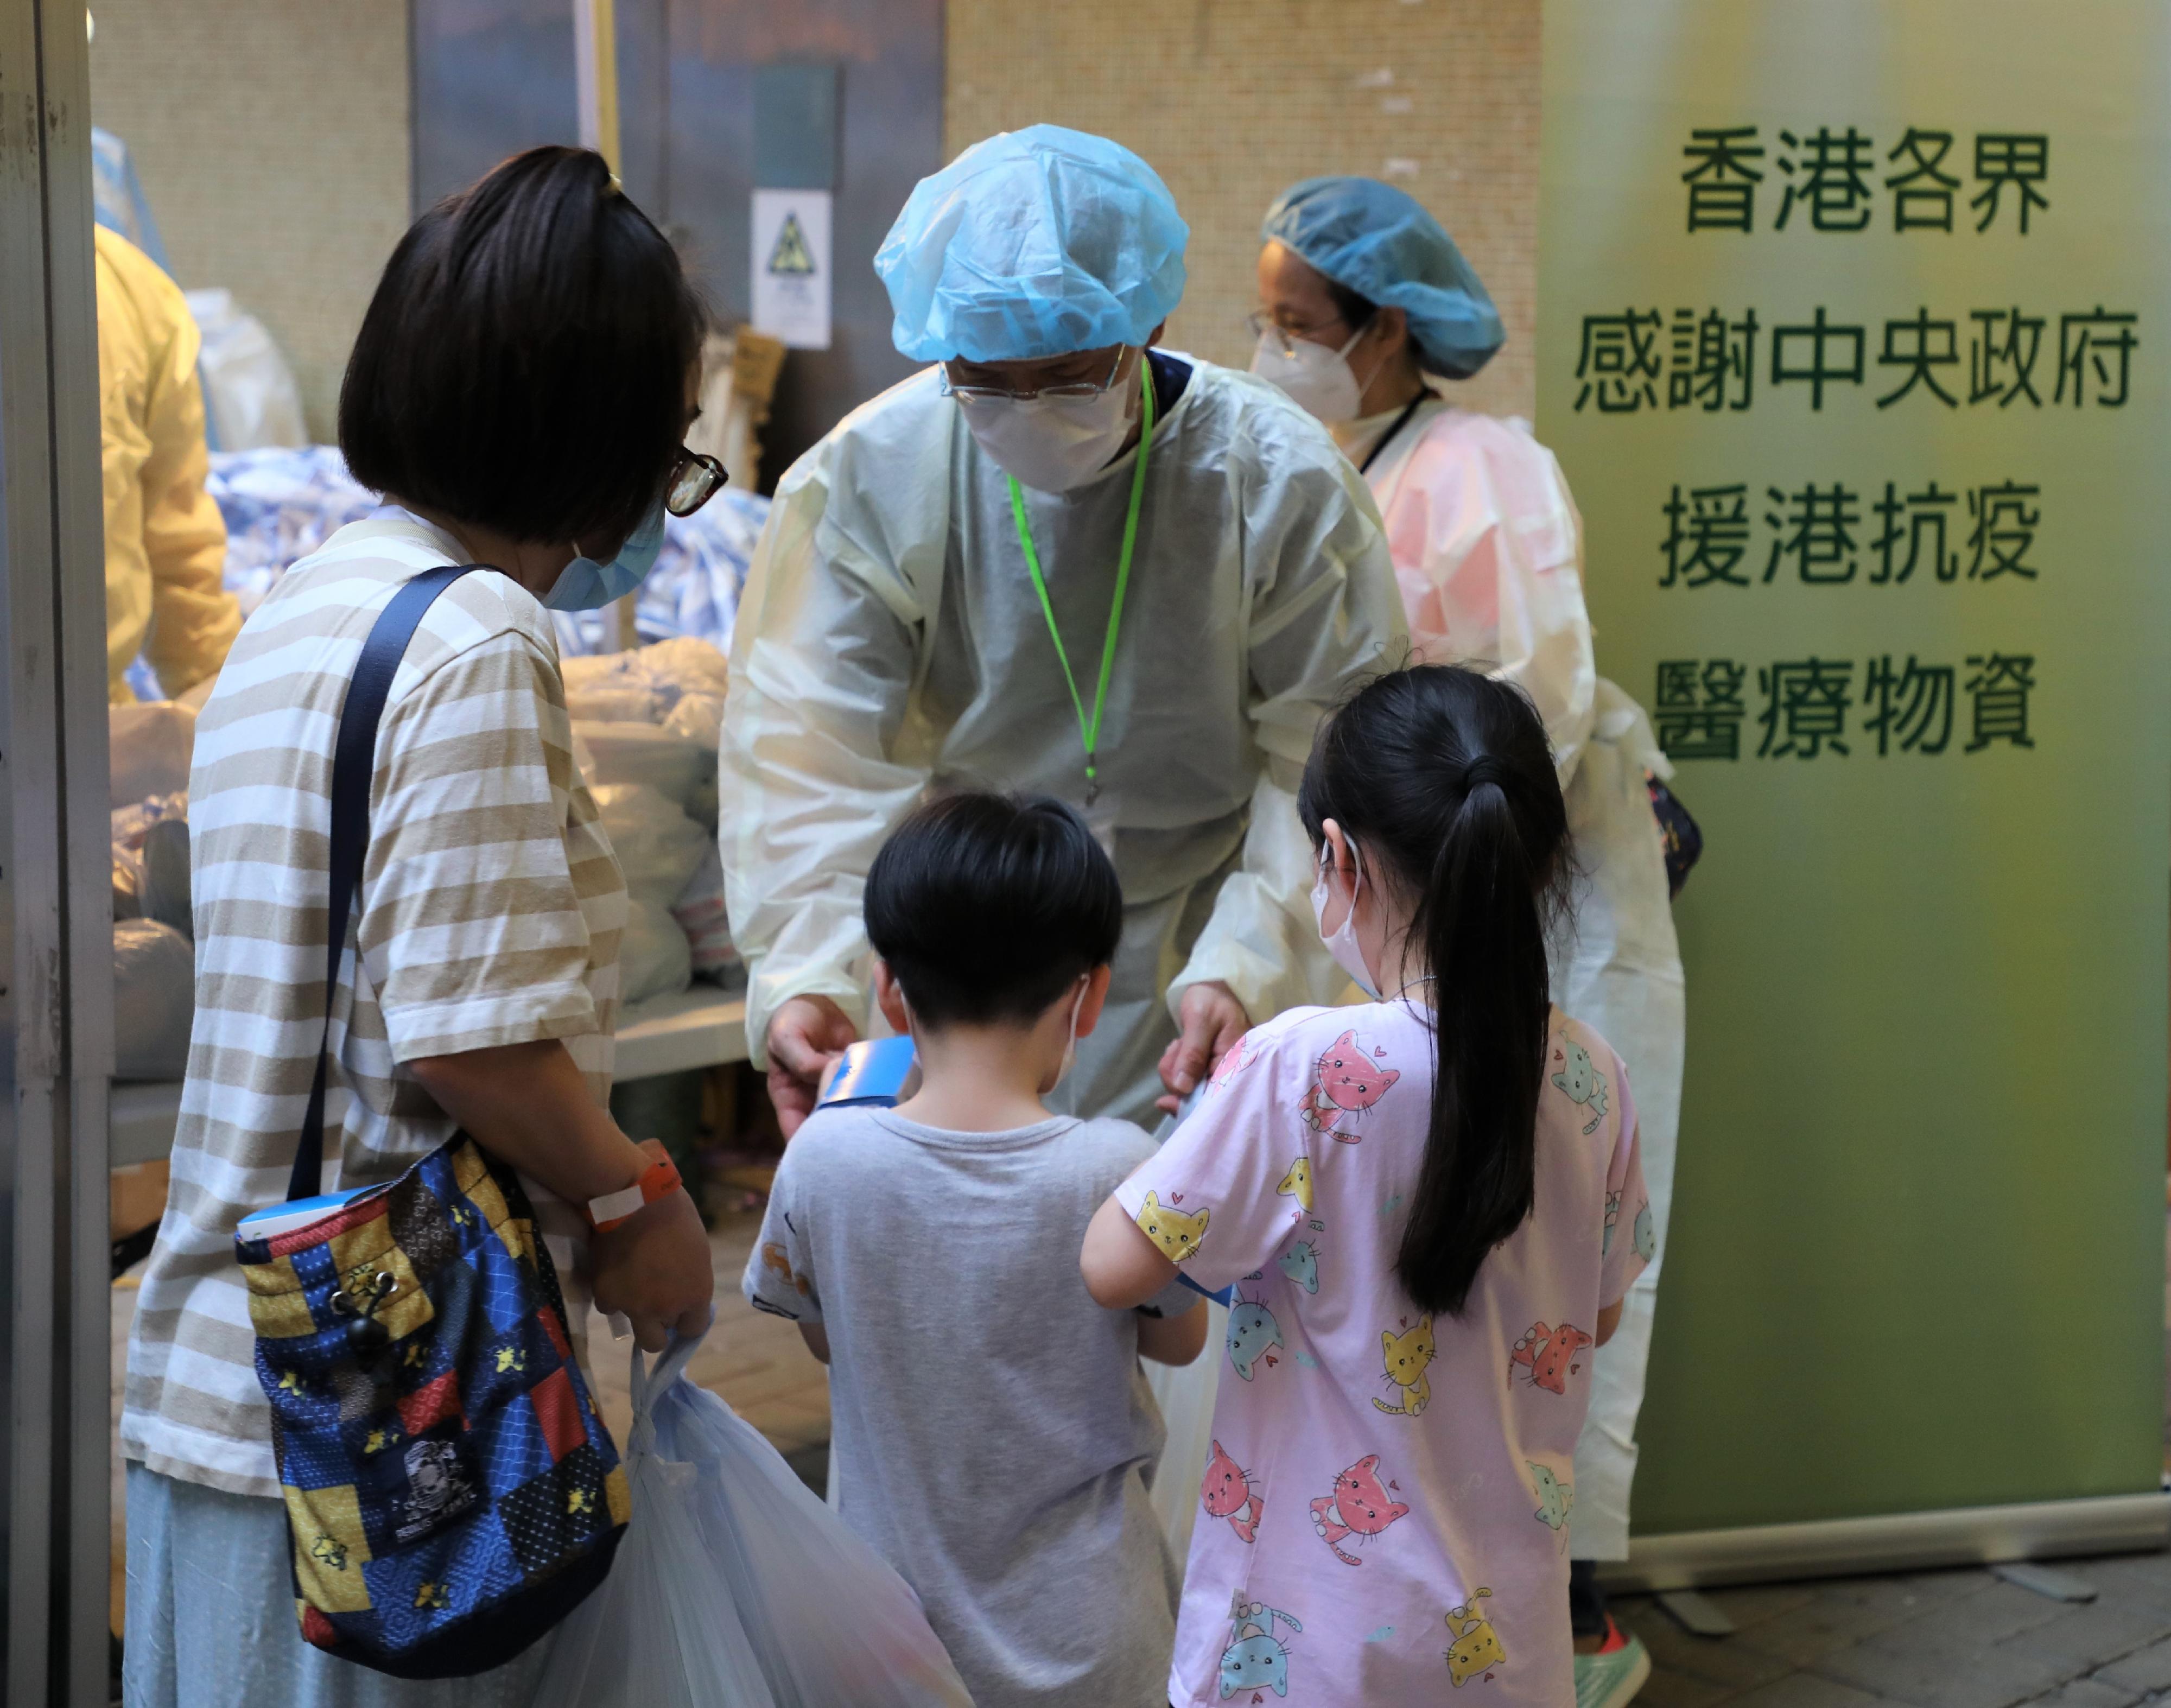 The Government yesterday (June 12) enforced "restriction-testing declaration" and compulsory testing notice in respect of specified "restricted area" in King Man House, Ho Man Tin Estate, Kowloon City. Photo shows a staff member of the Agriculture, Fisheries and Conservation Department distributing food packs and rapid antigen test kits, as well as anti-epidemic proprietary Chinese medicines donated by the Central People’s Government, to residents subject to compulsory testing.